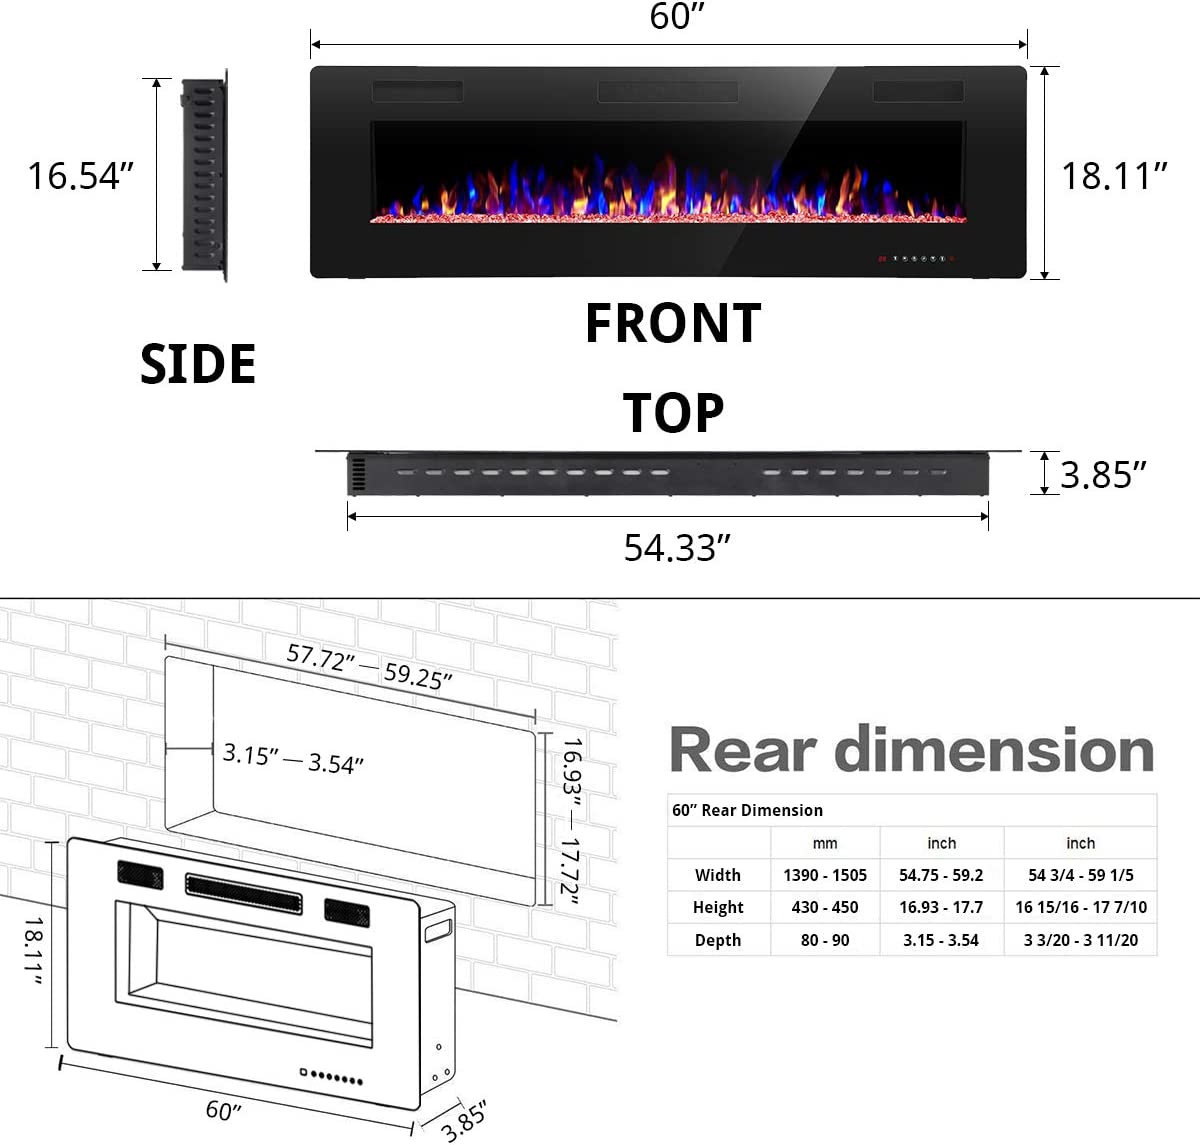 30 x 50 x 68 Electric Fireplace, in-Wall Recessed  Wall Mounted 1500W Heater Linear Timer,, Multicolor Flames, Touch Screen